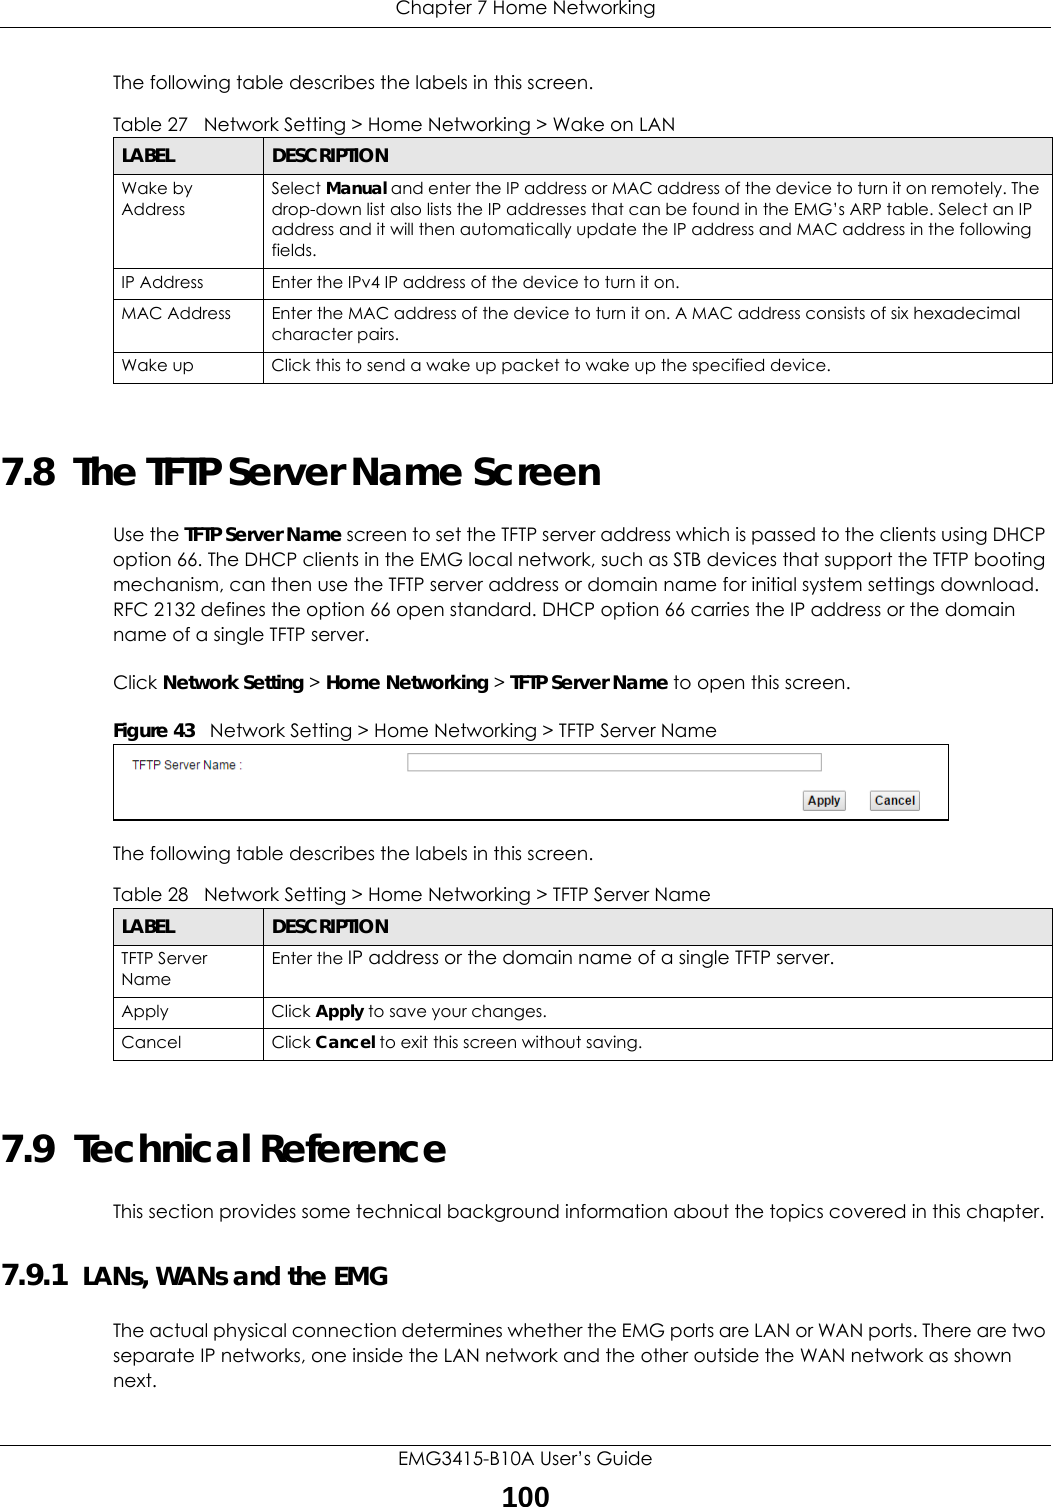 Chapter 7 Home NetworkingEMG3415-B10A User’s Guide100The following table describes the labels in this screen.7.8  The TFTP Server Name ScreenUse the TFTP Server Name screen to set the TFTP server address which is passed to the clients using DHCP option 66. The DHCP clients in the EMG local network, such as STB devices that support the TFTP booting mechanism, can then use the TFTP server address or domain name for initial system settings download. RFC 2132 defines the option 66 open standard. DHCP option 66 carries the IP address or the domain name of a single TFTP server.Click Network Setting &gt; Home Networking &gt; TFTP Server Name to open this screen.  Figure 43   Network Setting &gt; Home Networking &gt; TFTP Server NameThe following table describes the labels in this screen.7.9  Technical ReferenceThis section provides some technical background information about the topics covered in this chapter.7.9.1  LANs, WANs and the EMGThe actual physical connection determines whether the EMG ports are LAN or WAN ports. There are two separate IP networks, one inside the LAN network and the other outside the WAN network as shown next.Table 27   Network Setting &gt; Home Networking &gt; Wake on LANLABEL DESCRIPTIONWake by AddressSelect Manual and enter the IP address or MAC address of the device to turn it on remotely. The drop-down list also lists the IP addresses that can be found in the EMG’s ARP table. Select an IP address and it will then automatically update the IP address and MAC address in the following fields.IP Address Enter the IPv4 IP address of the device to turn it on.MAC Address Enter the MAC address of the device to turn it on. A MAC address consists of six hexadecimal character pairs.Wake up Click this to send a wake up packet to wake up the specified device. Table 28   Network Setting &gt; Home Networking &gt; TFTP Server NameLABEL DESCRIPTIONTFTP Server NameEnter the IP address or the domain name of a single TFTP server.Apply Click Apply to save your changes.Cancel Click Cancel to exit this screen without saving.